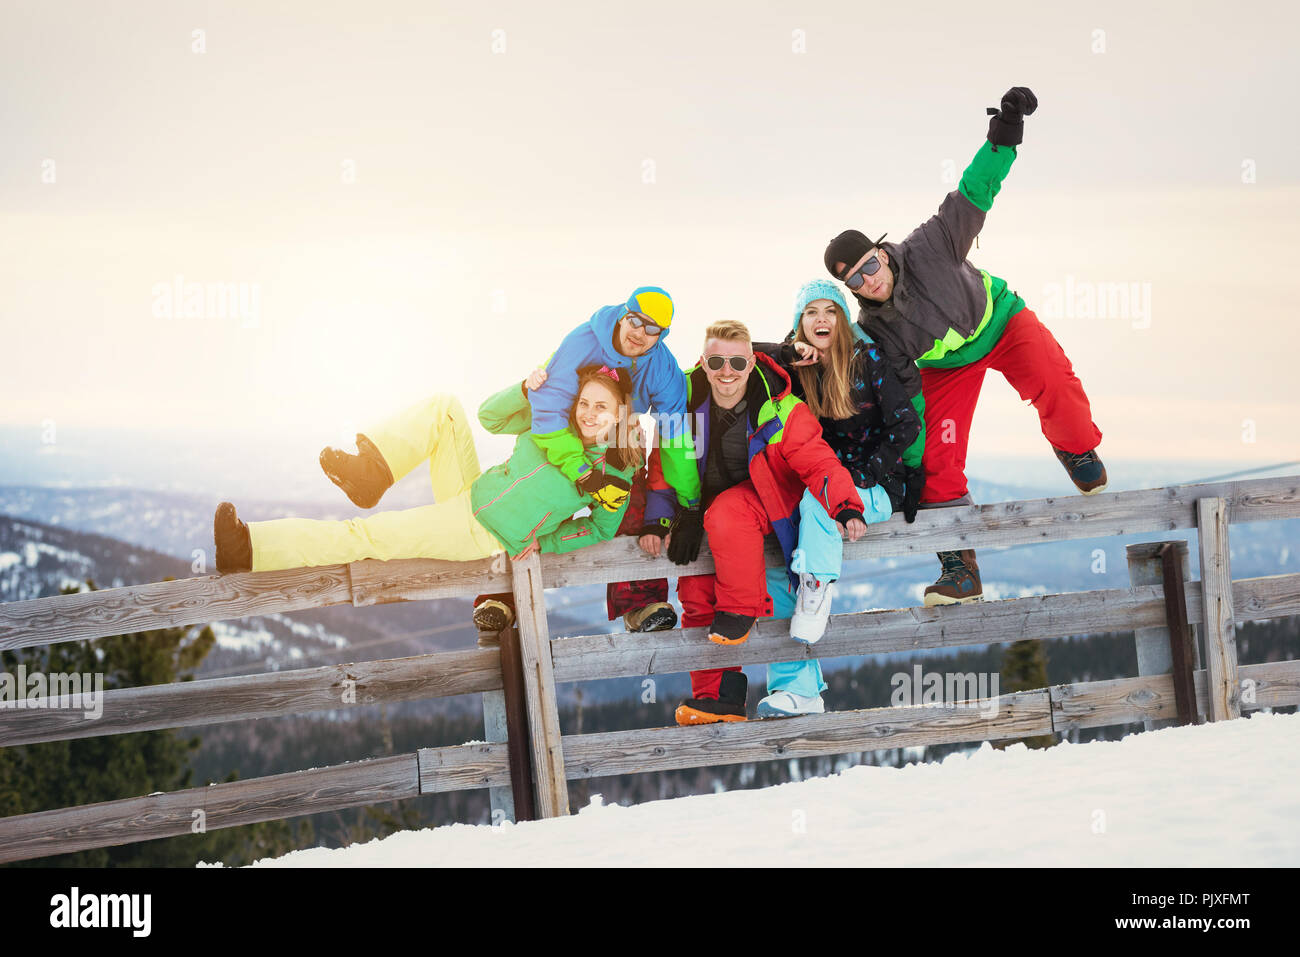 Group of happy friends is having fun at ski resort against sunset mountains Stock Photo